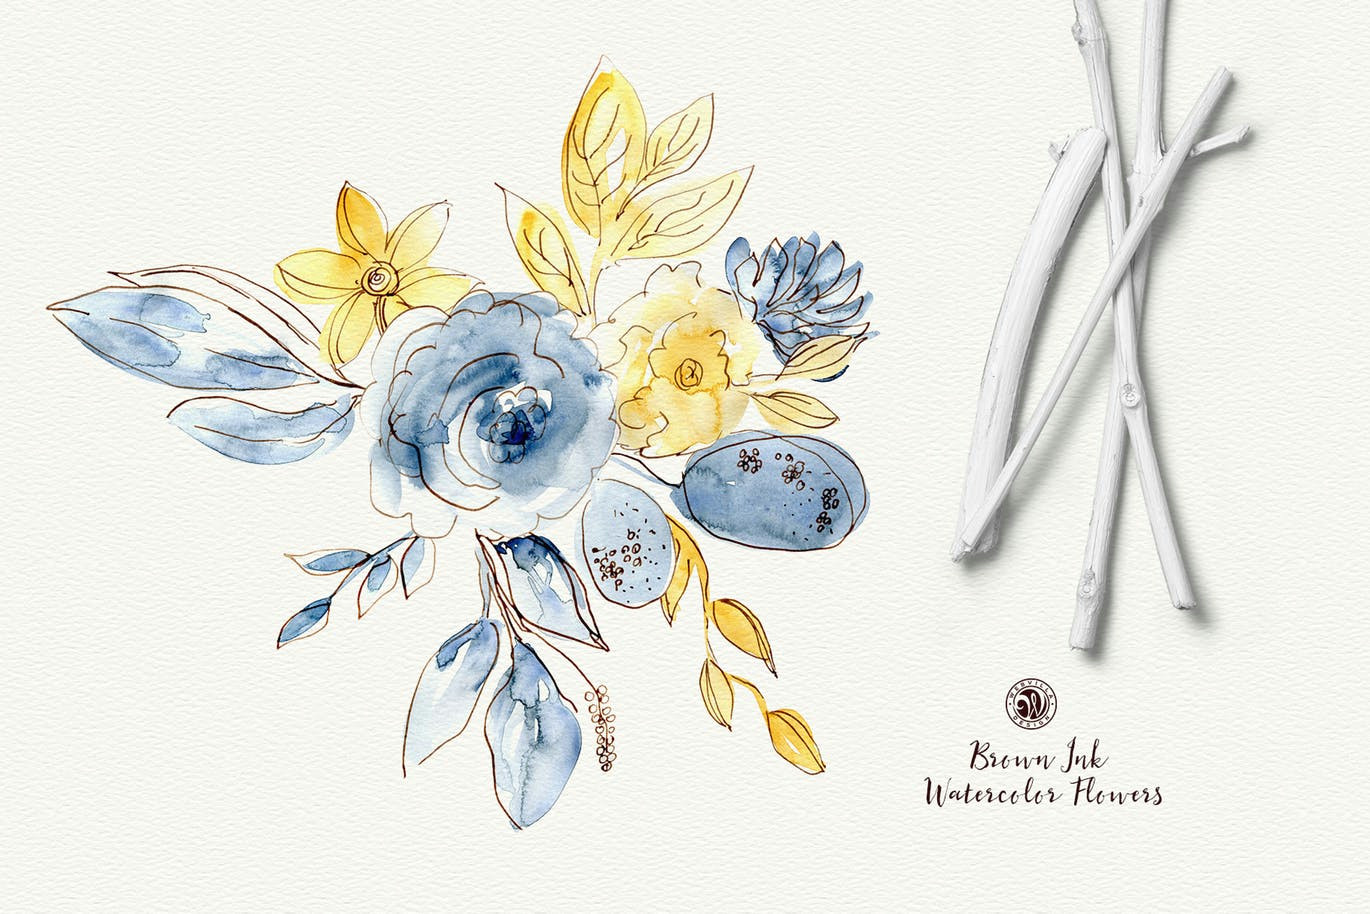 Drawing Flowers for Watercolor Brown Ink Watercolor Flowers by Webvilla On Envato Elements